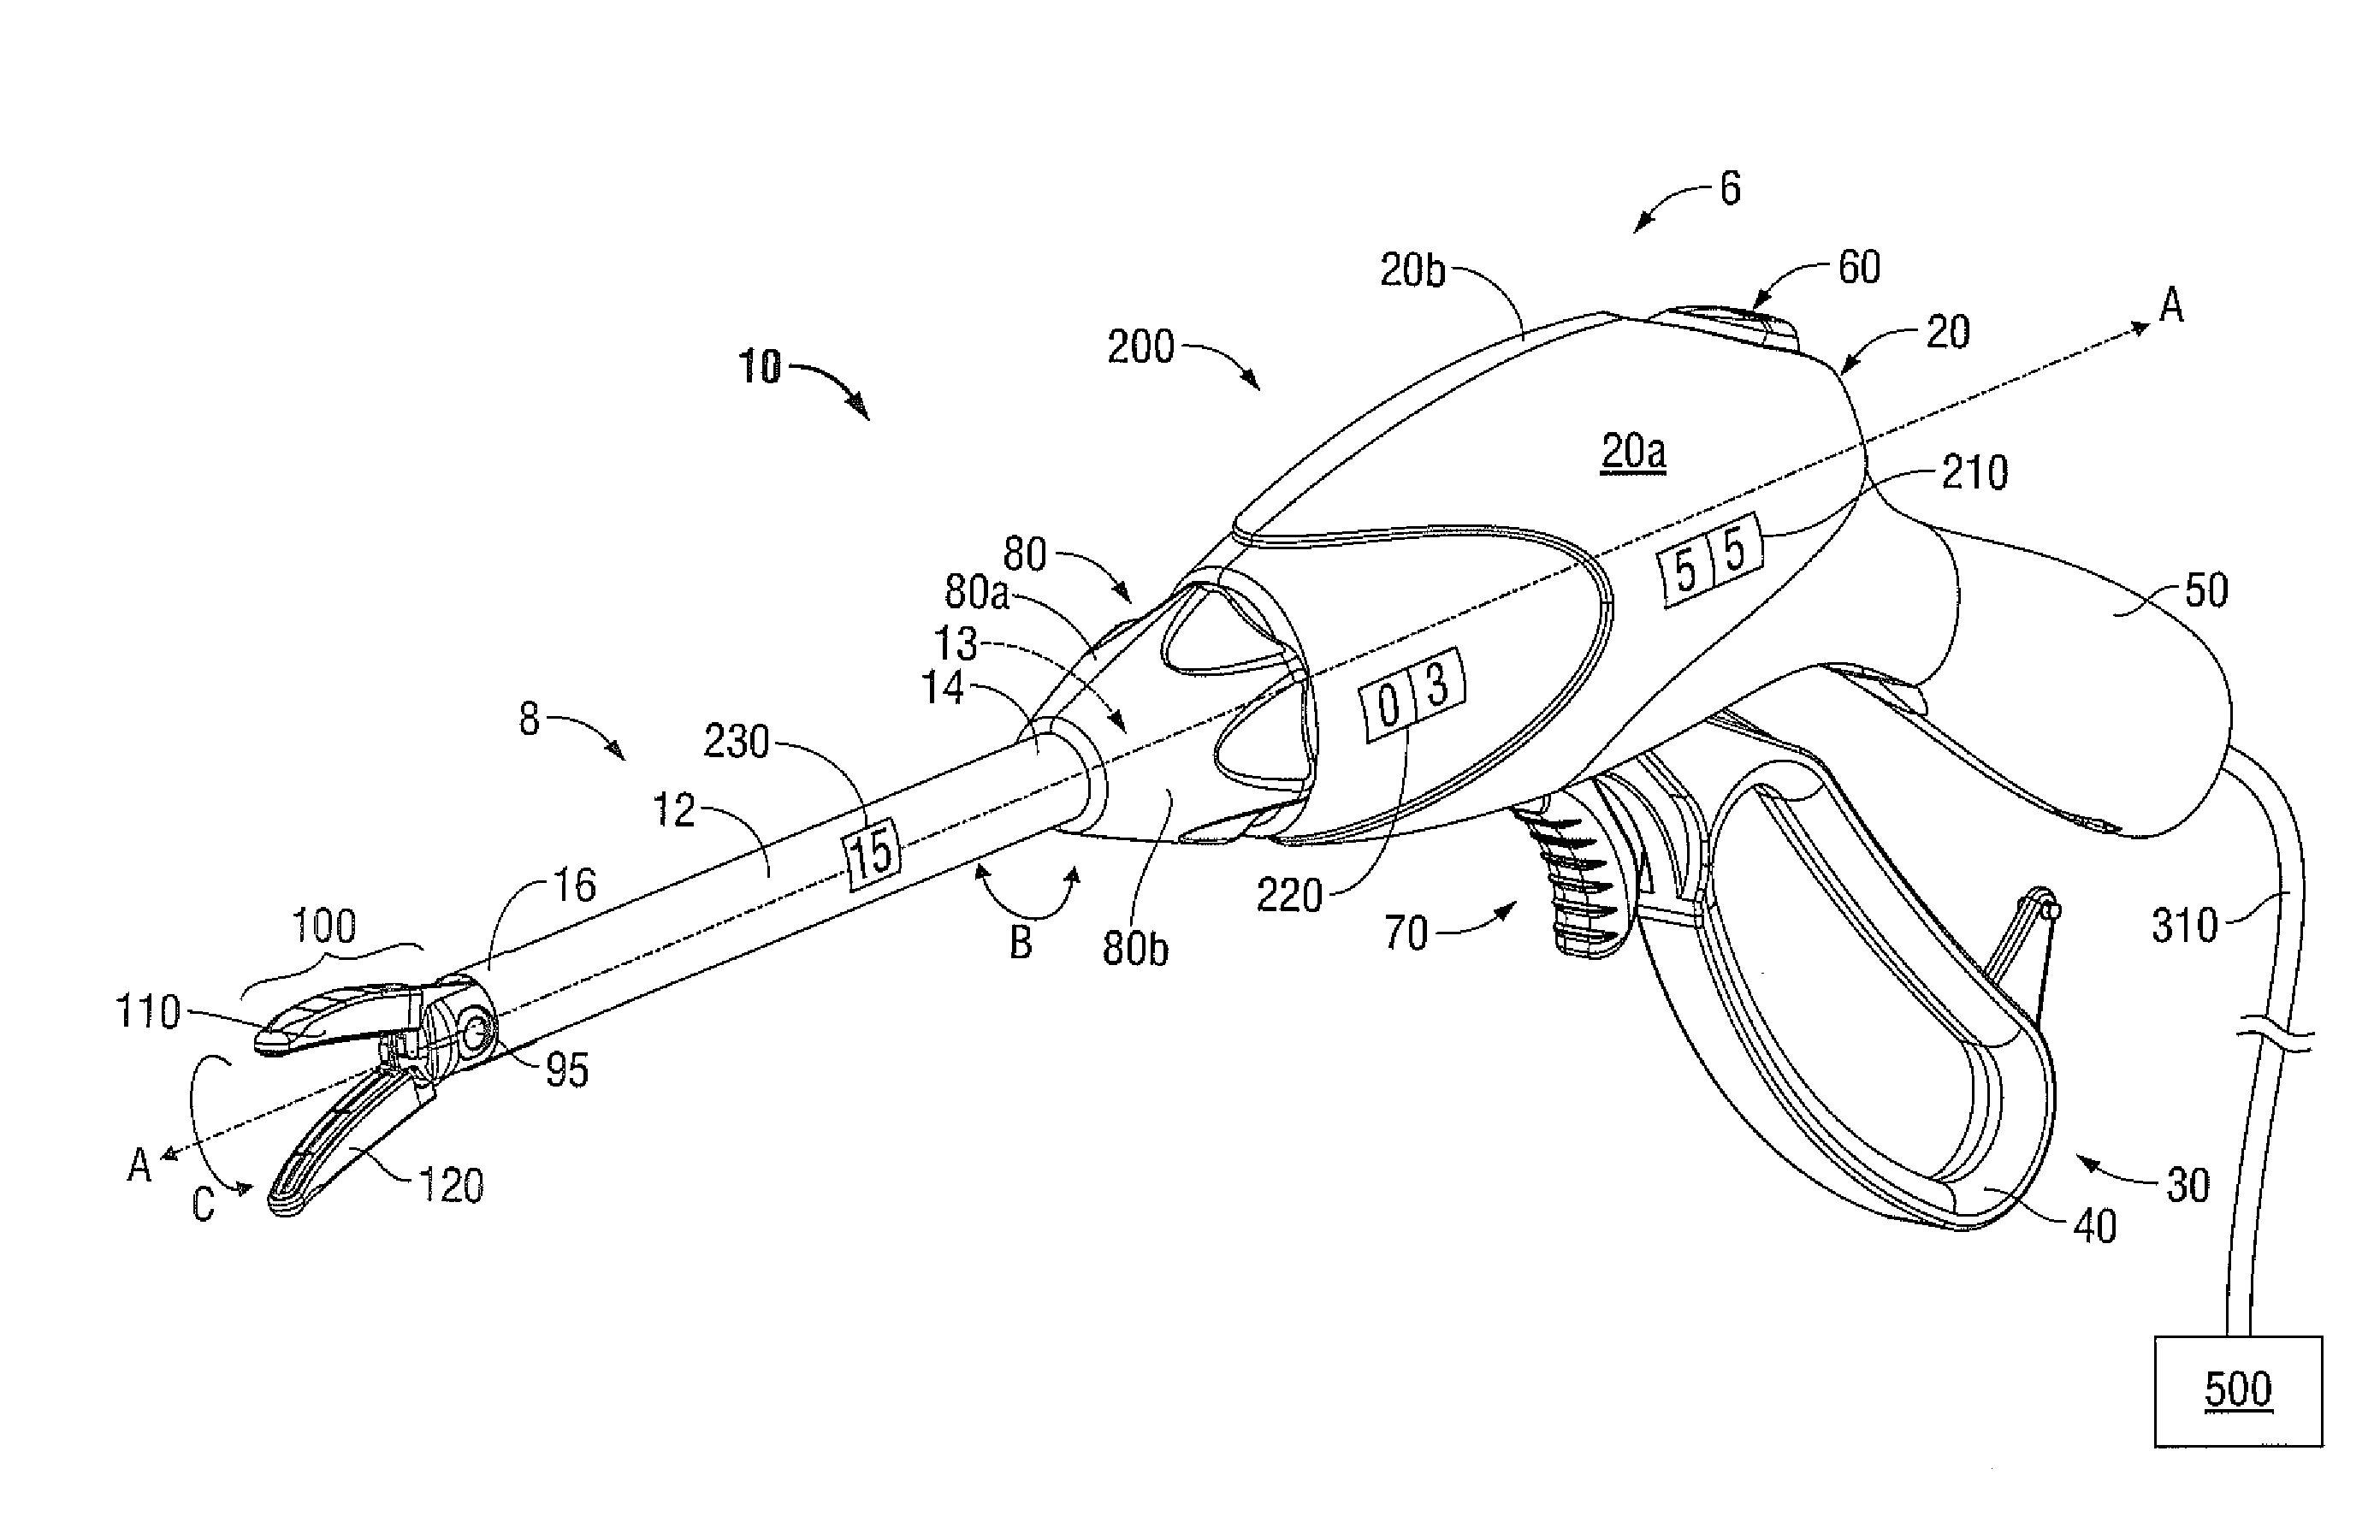 Reusable Medical Device with Advanced Counting Capability